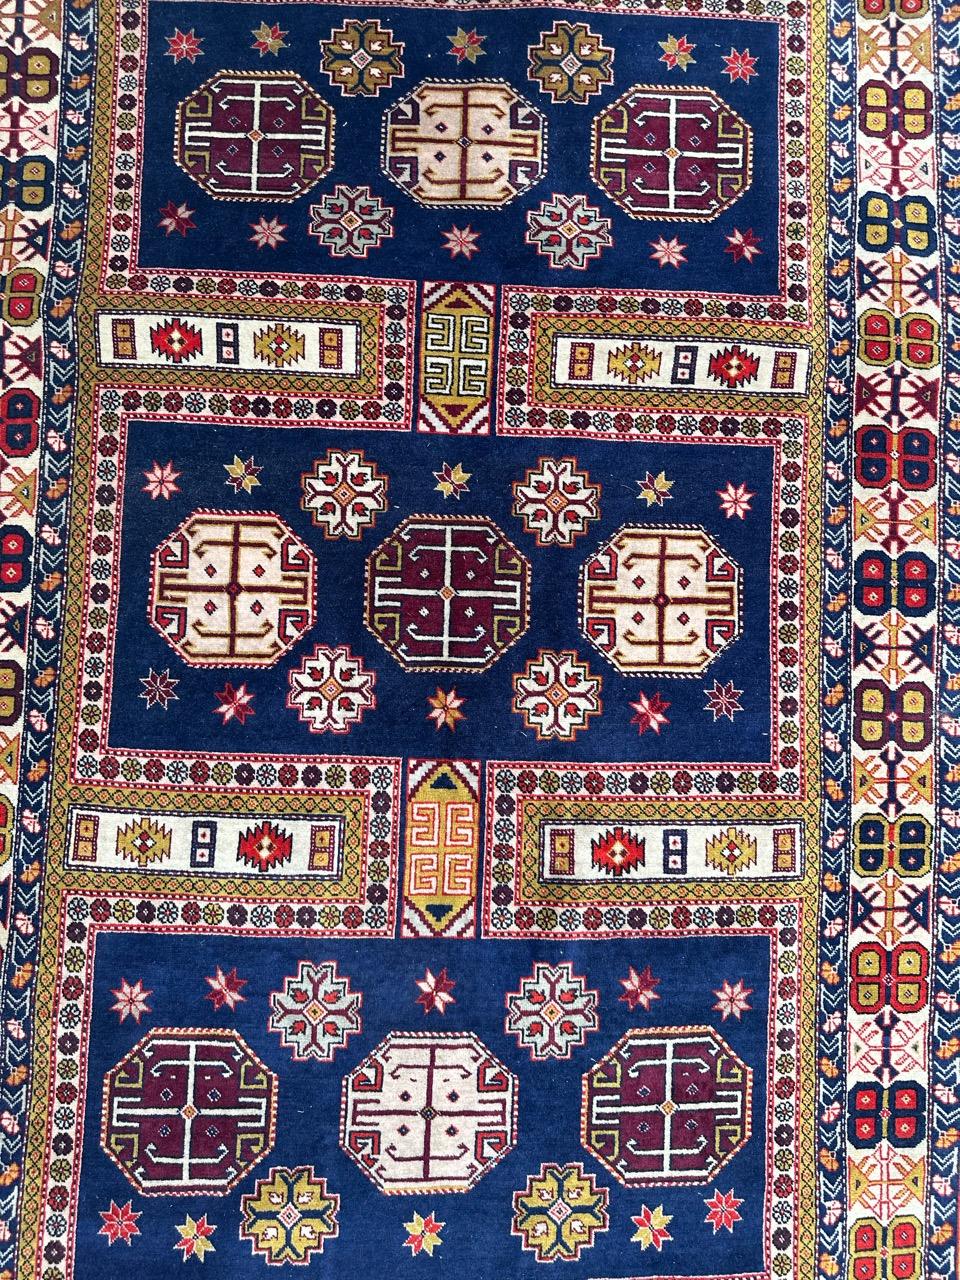 A meticulously handwoven 1970s-1980s Azerbaijani Chirwan rug, entirely crafted by skilled artisans using pure wool on a cotton foundation. This stunning piece features stylized designs reminiscent of ancient Caucasian Chirwan rugs, with three